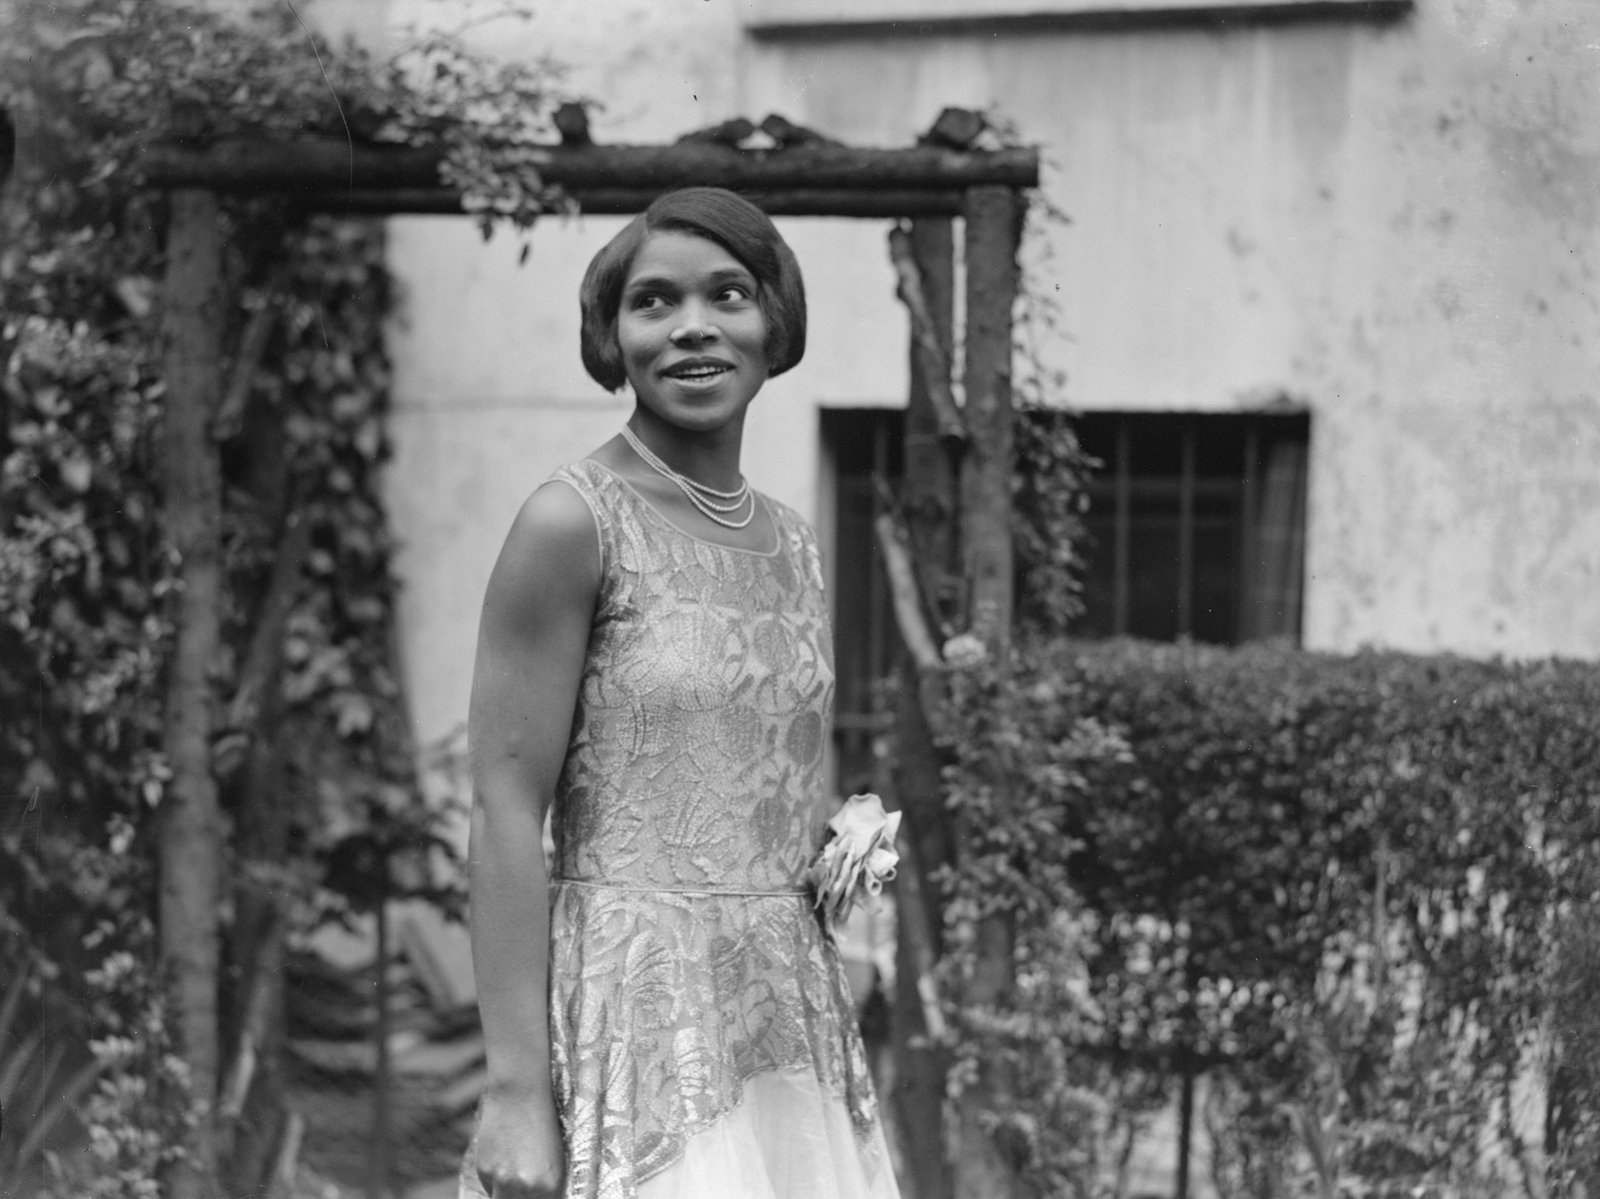 Marian Anderson, African American Singer, Black Singer, African American Entertainer, Black Entertainer, KOLUMN Magazine, KOLUMN, KINDR'D Magazine, KINDR'D, Willoughby Avenue, WRIIT, Wriit,